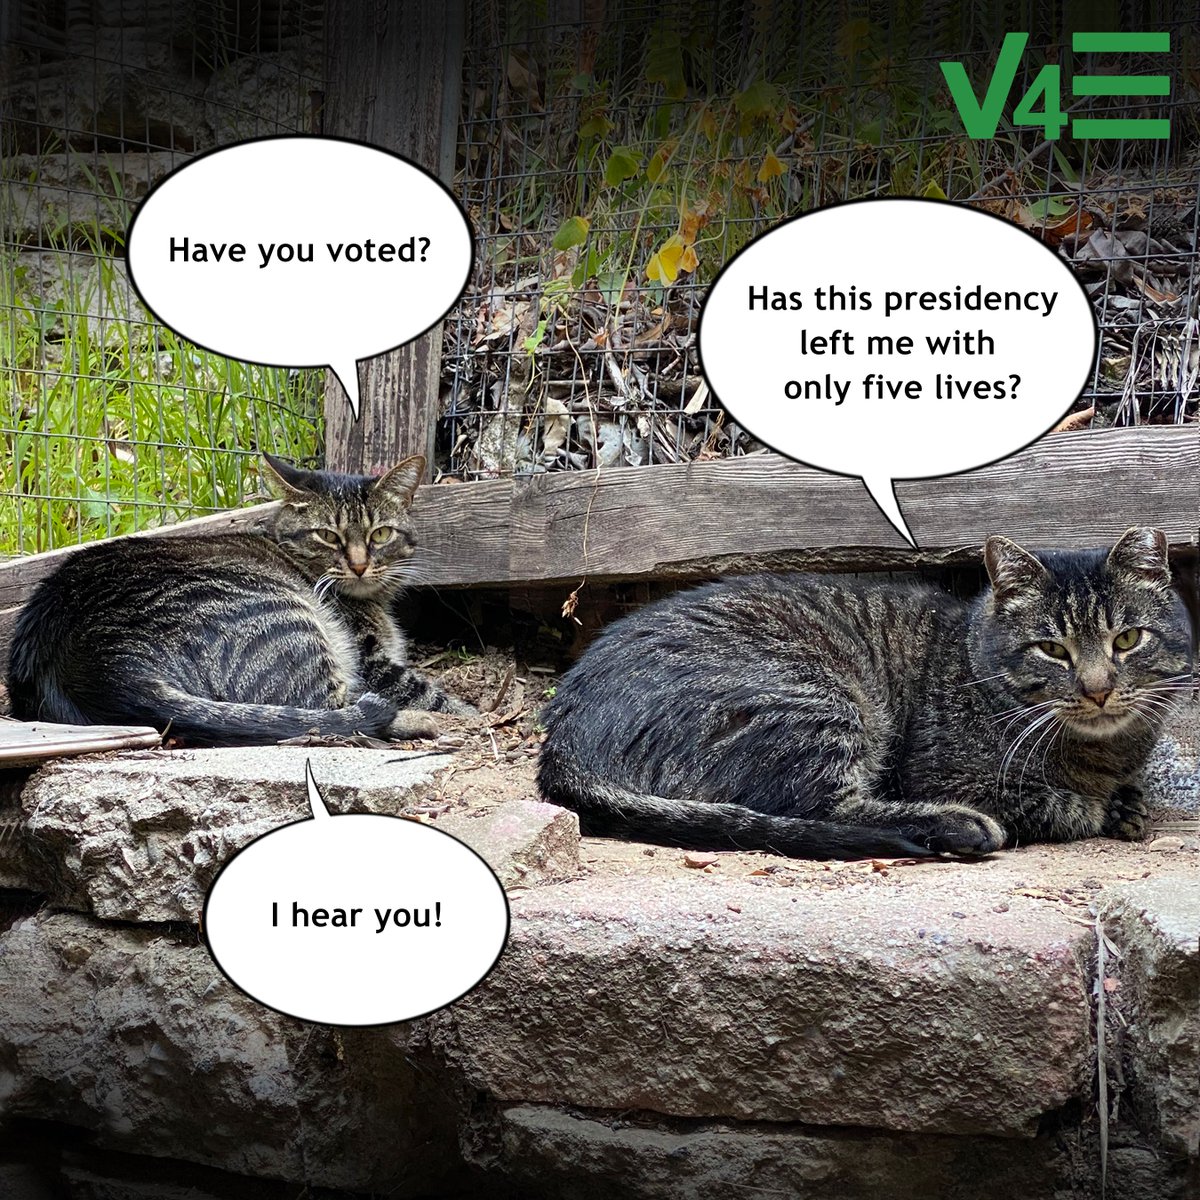 Some much needed humor on this Monday... But in all seriousness, do as the cats say, and #Vote4Equality!